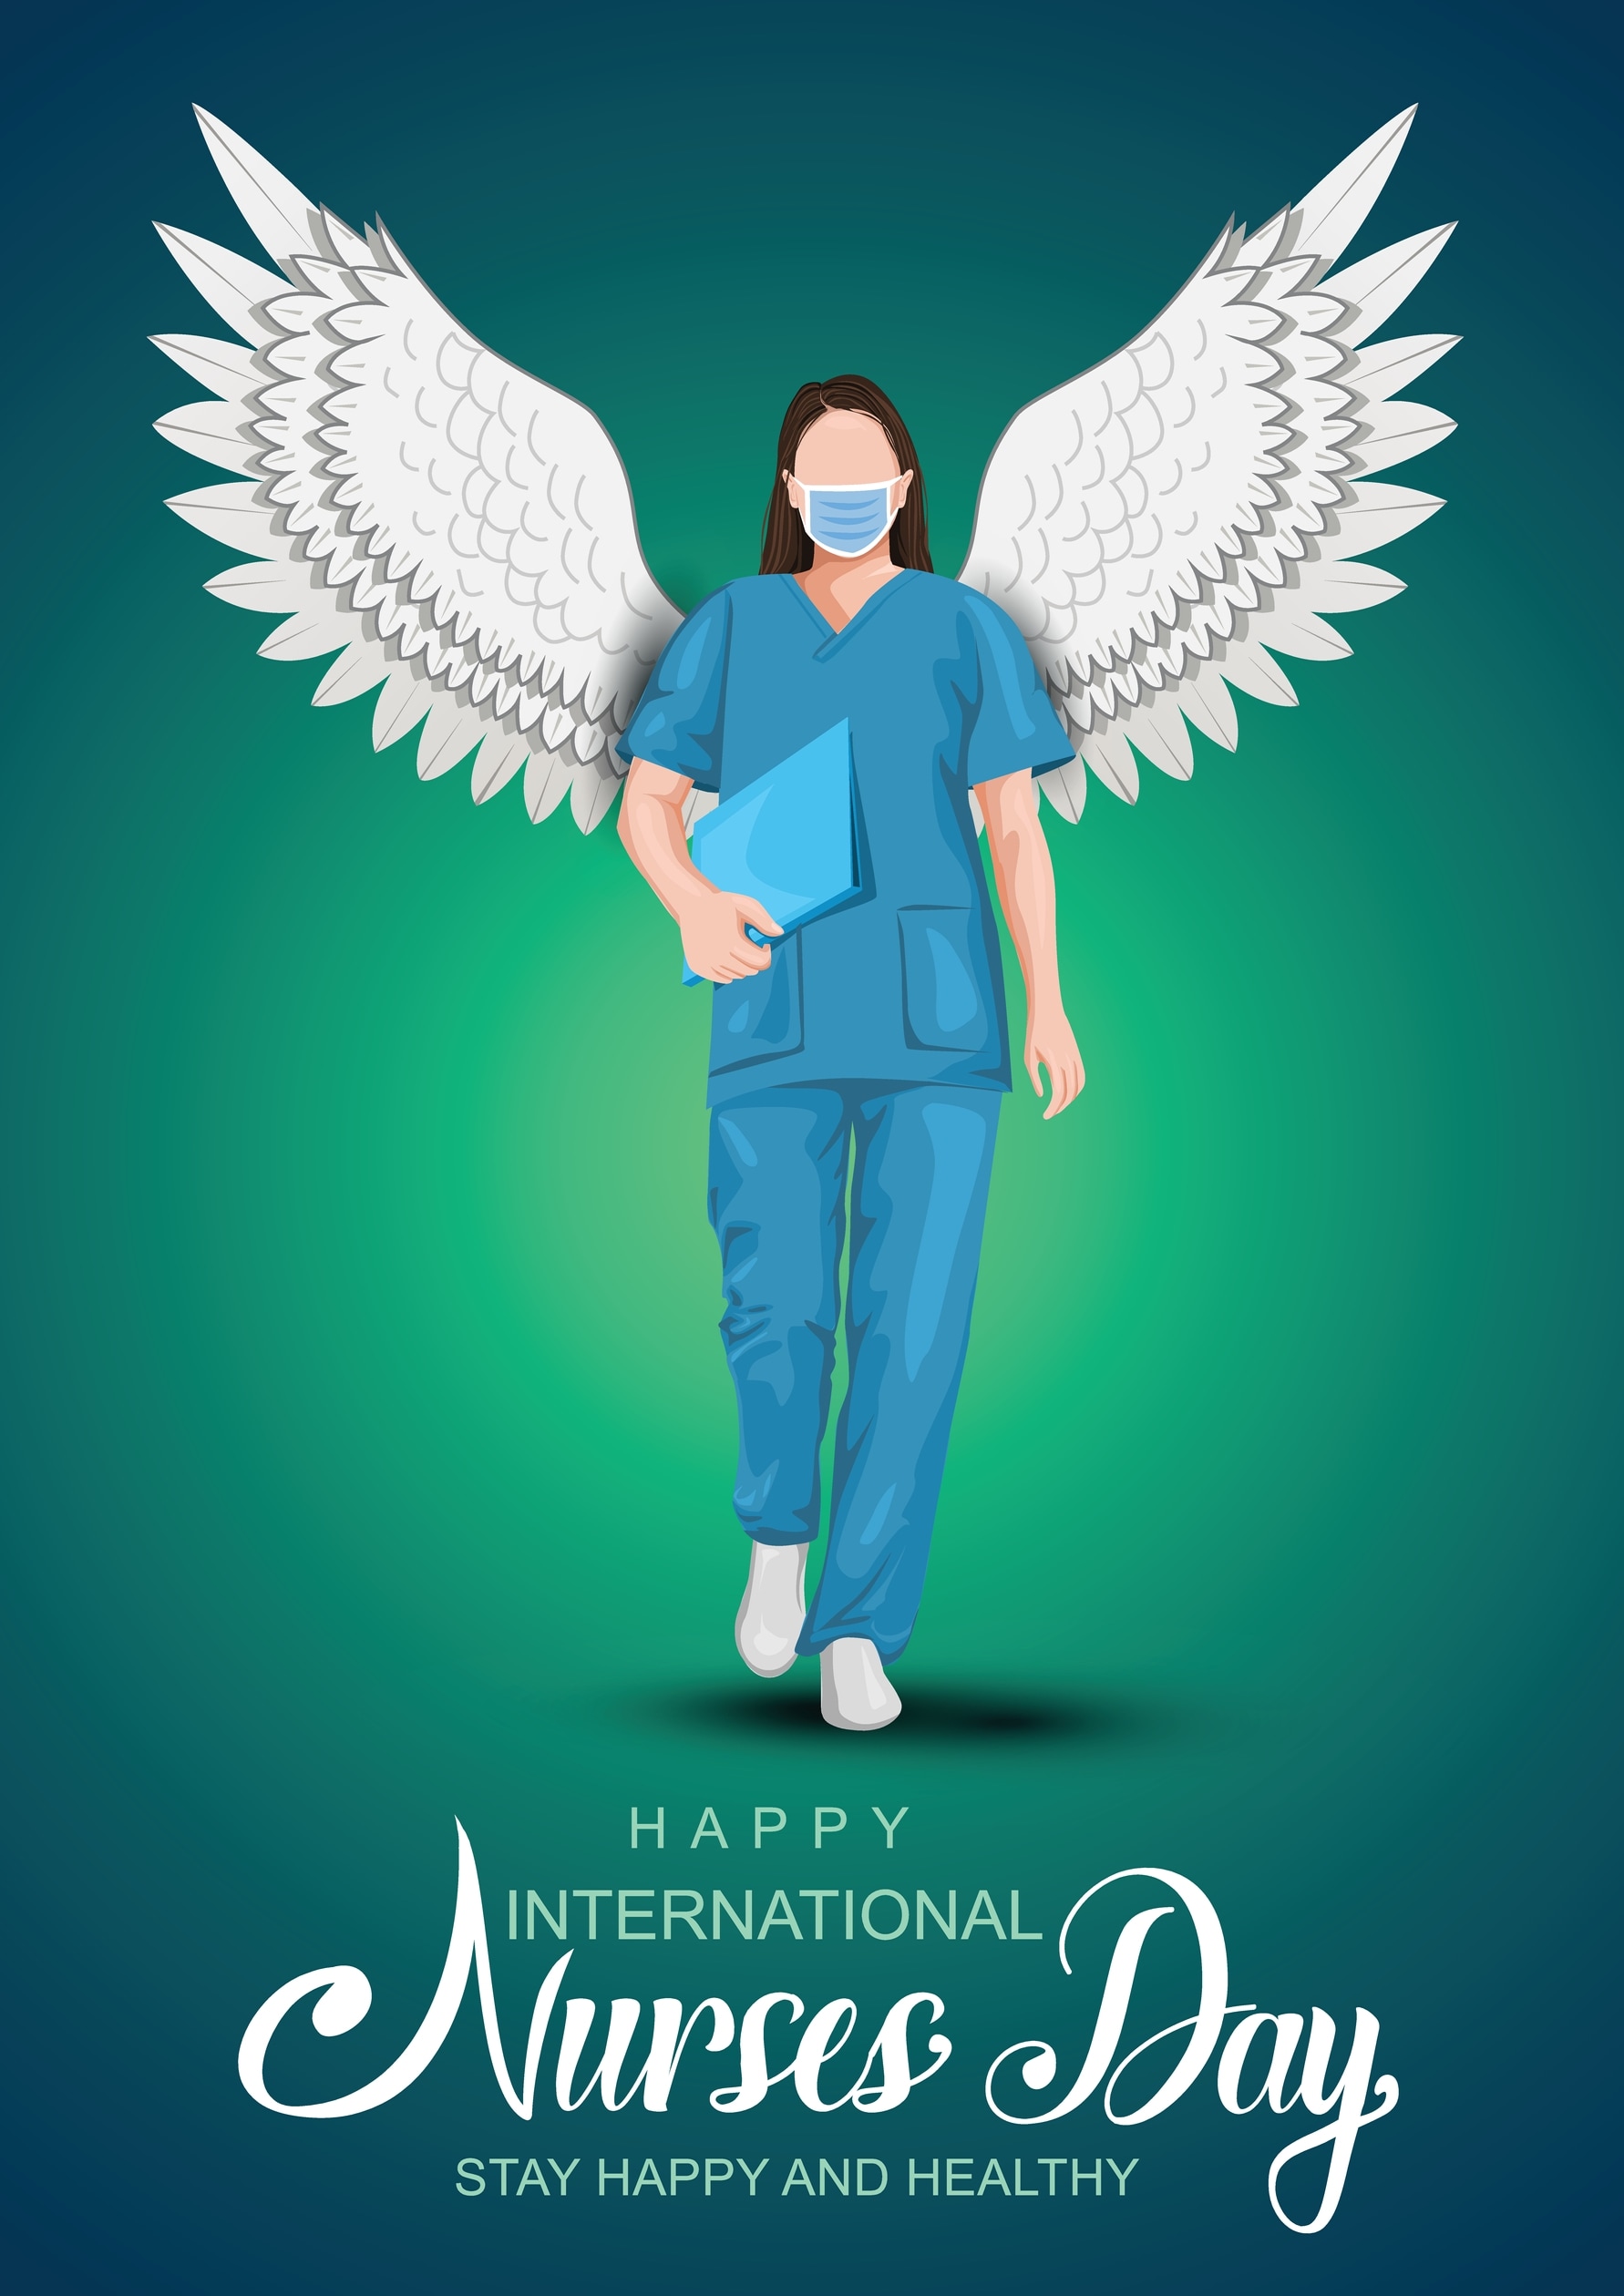 Happy International Nurses Day 2022 Wishes, Images, Status, Quotes